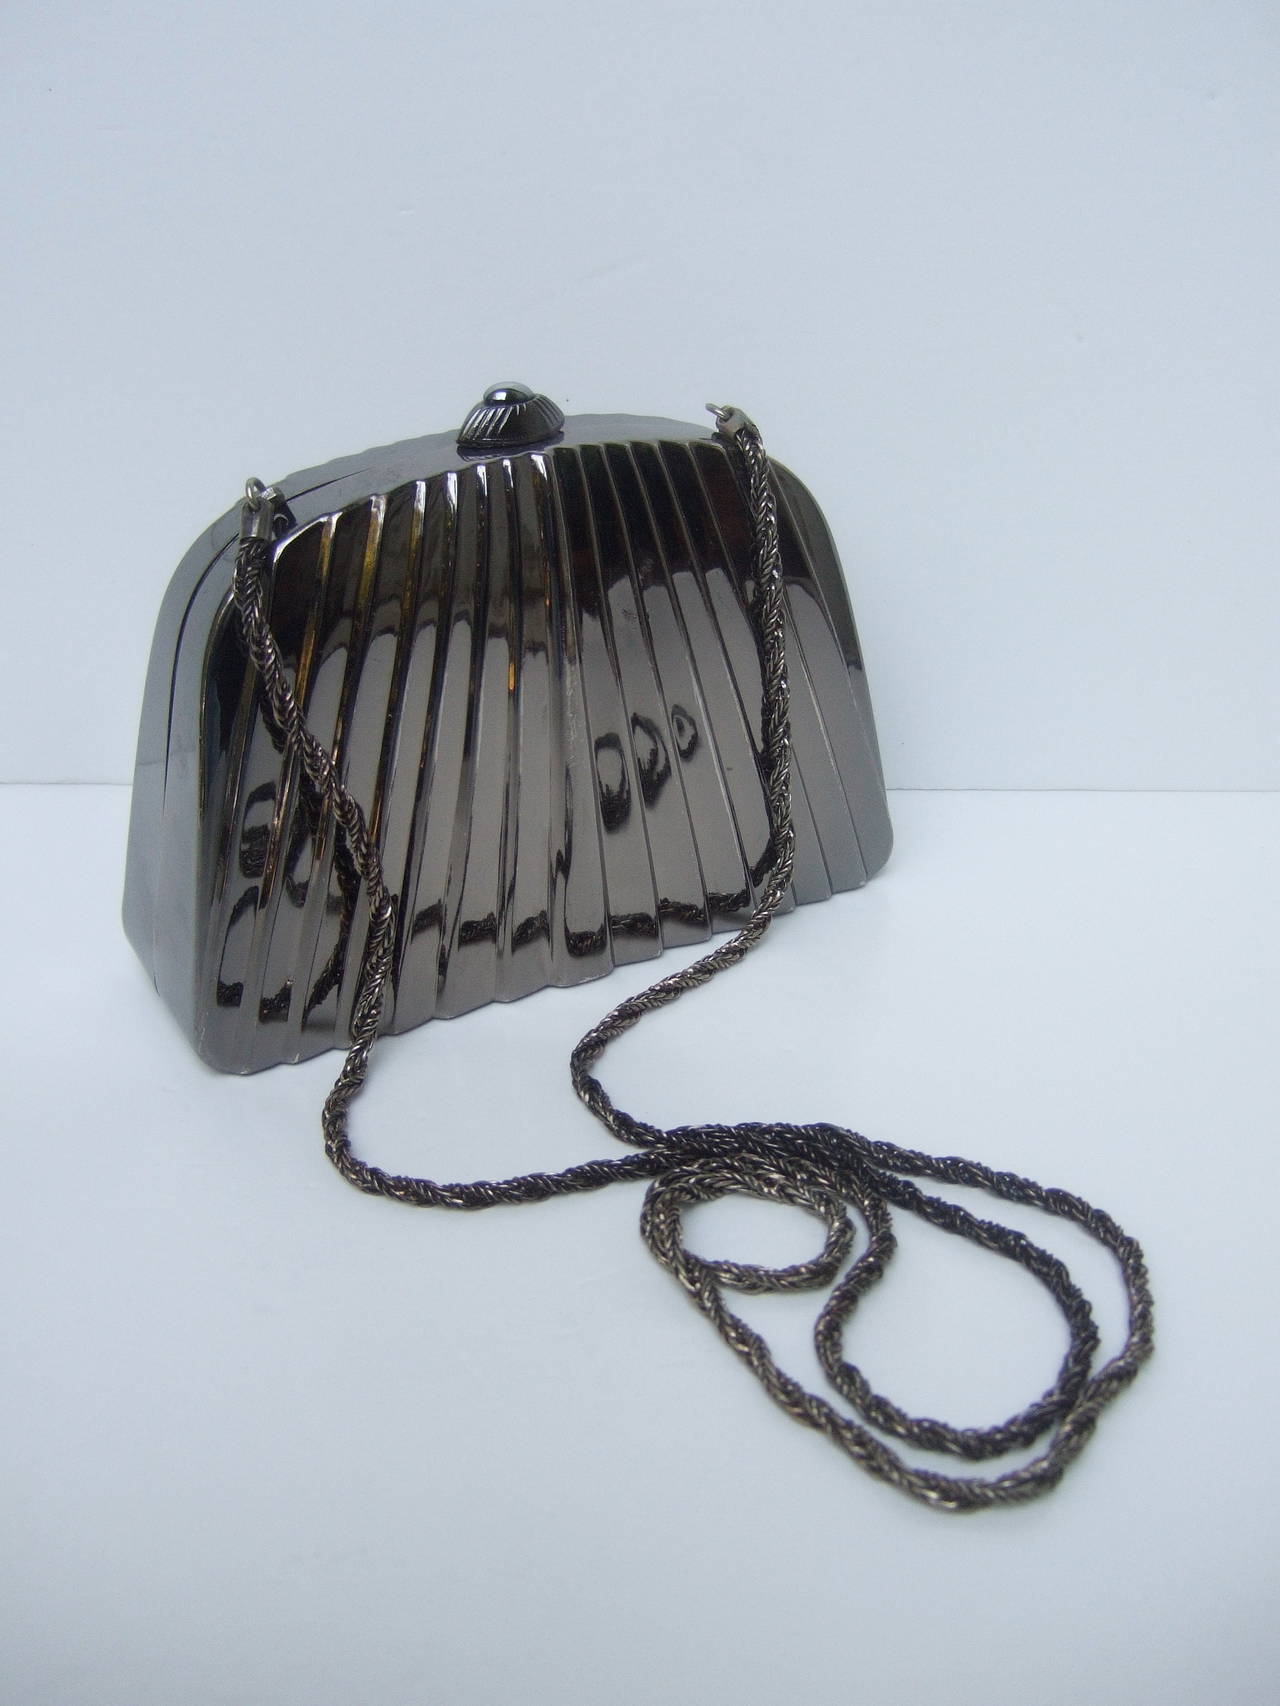 ***RESERVED SALE PENDING FOR SANDRA MITCHELL***

Neiman Marcus Sleek pewter metal evening bag Made in Italy c 1980s
The elegant evening bag is designed with a darkened pewter tone metal finish. The exterior panels are designed with linear